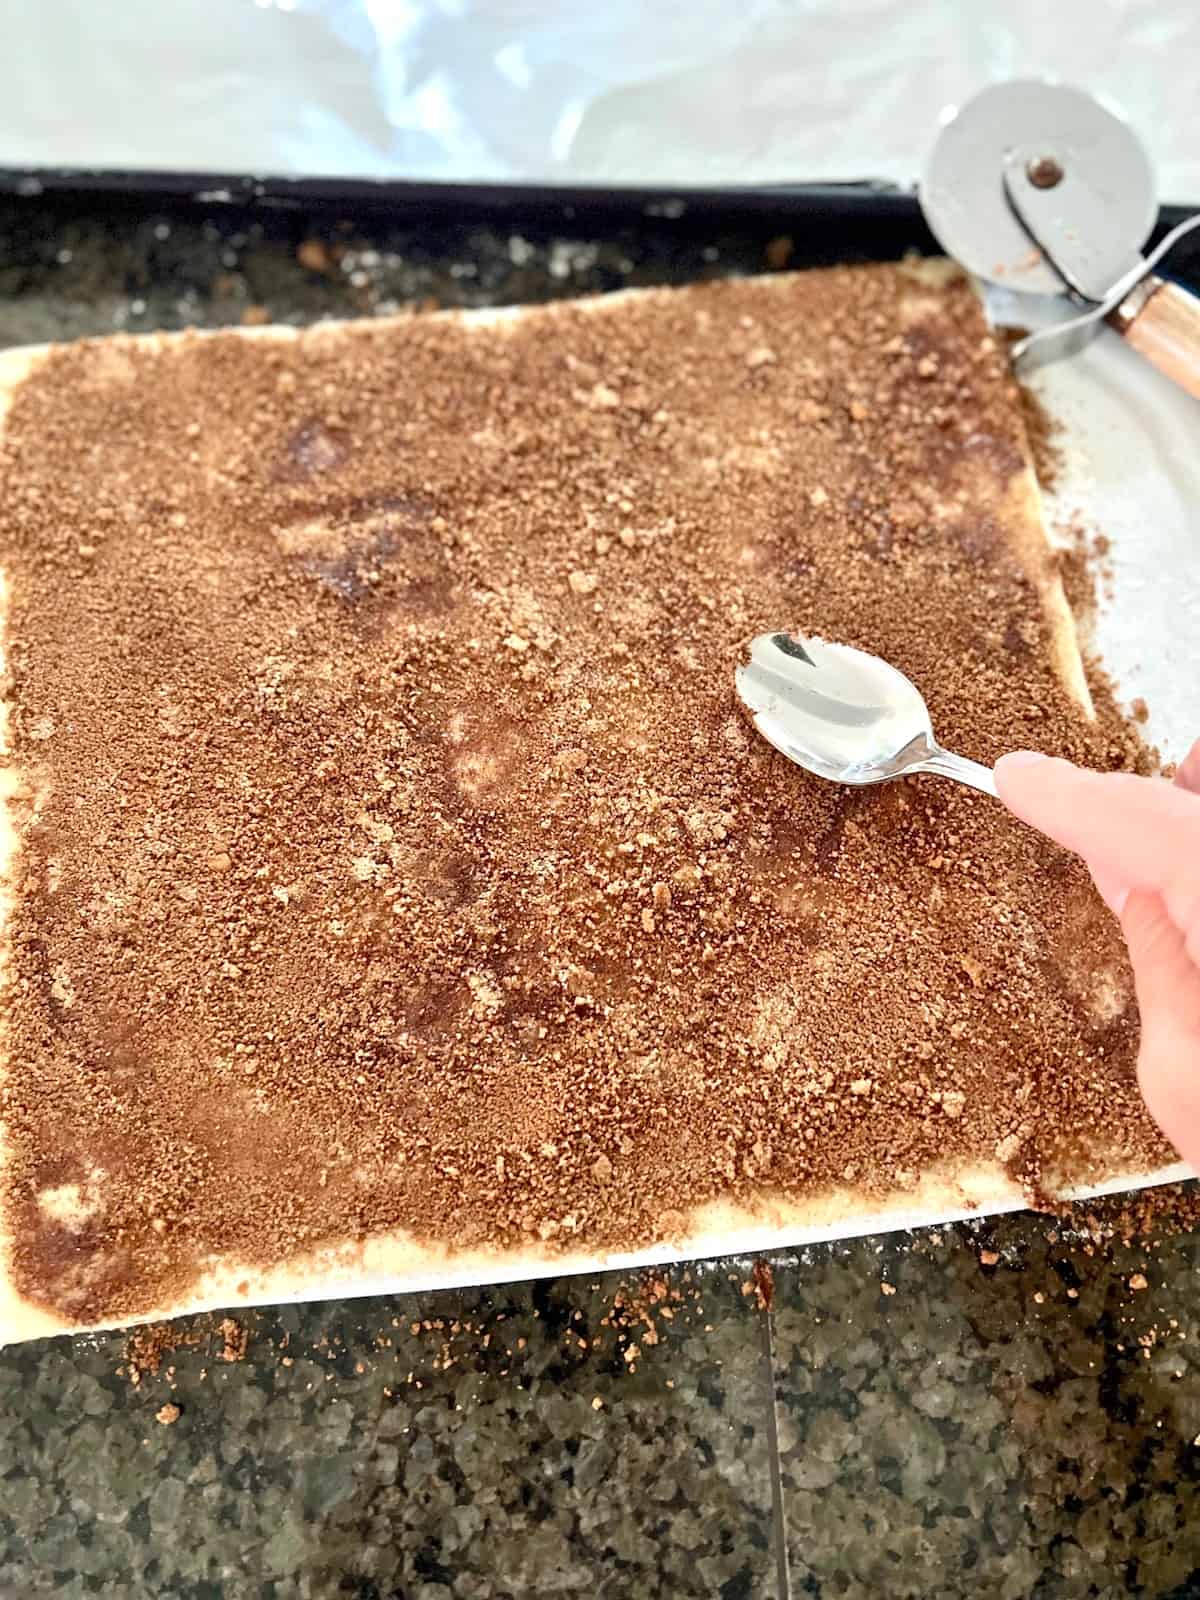 Spreading the cinnamon brown sugar on the puff pastry.